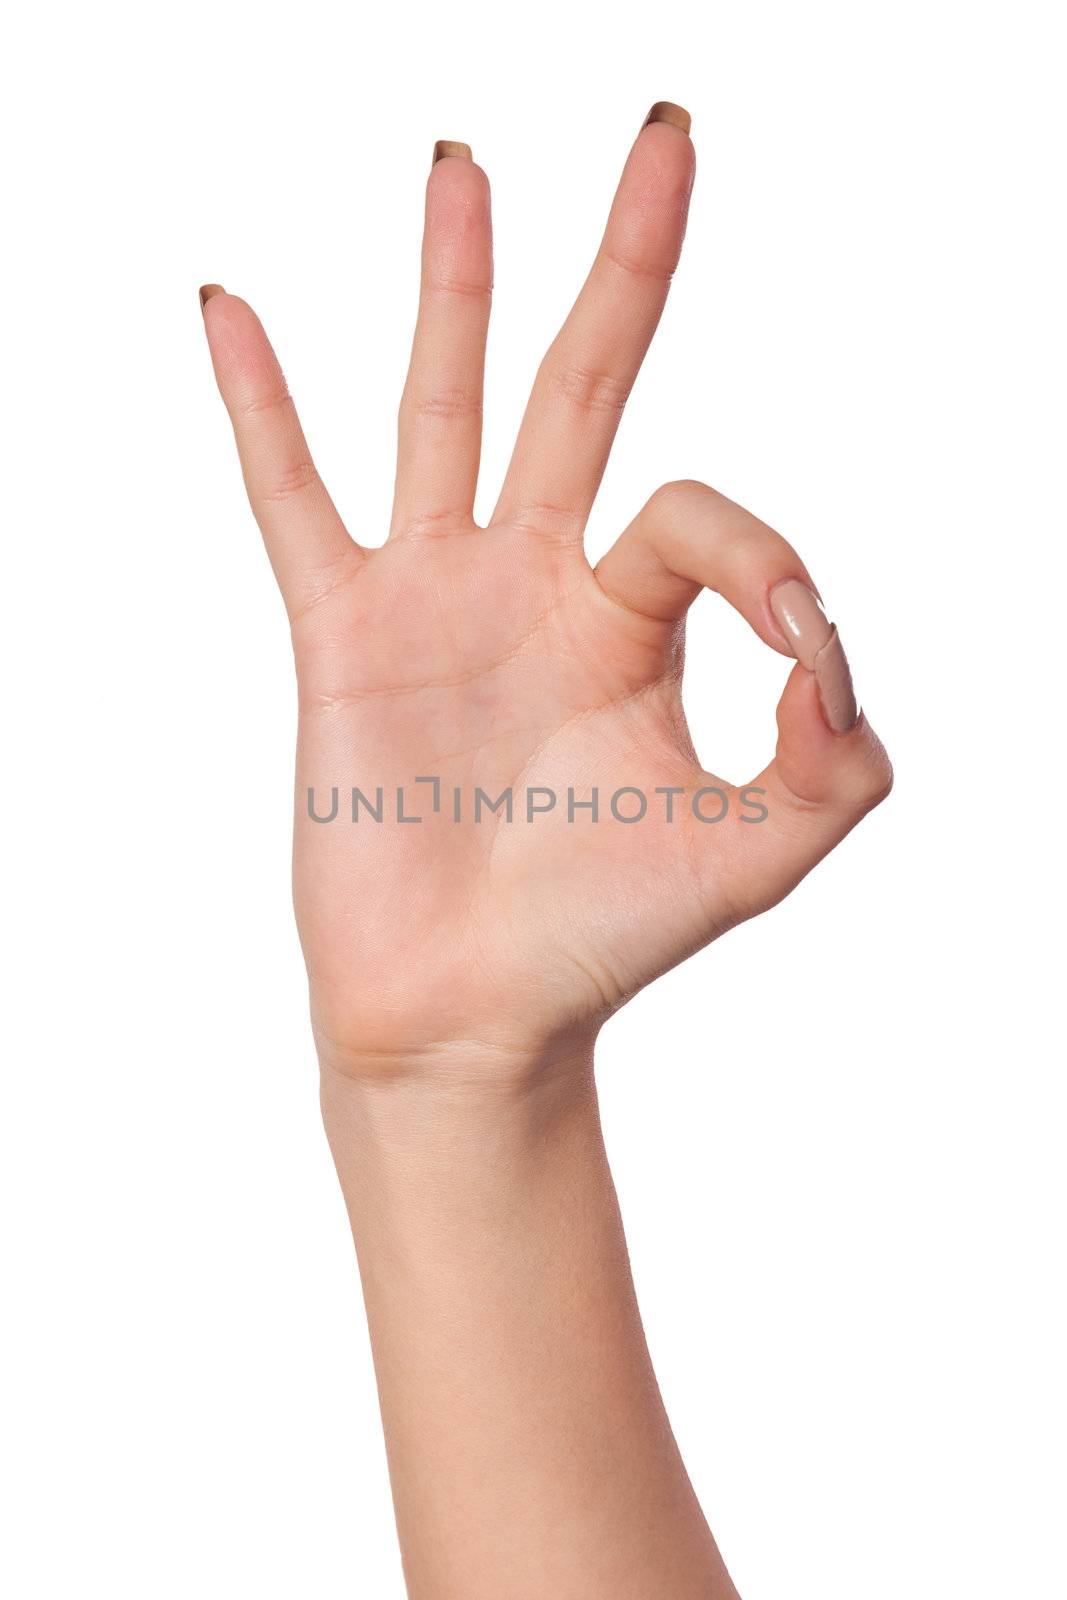 Hand is showing OK sign isolated on a white background